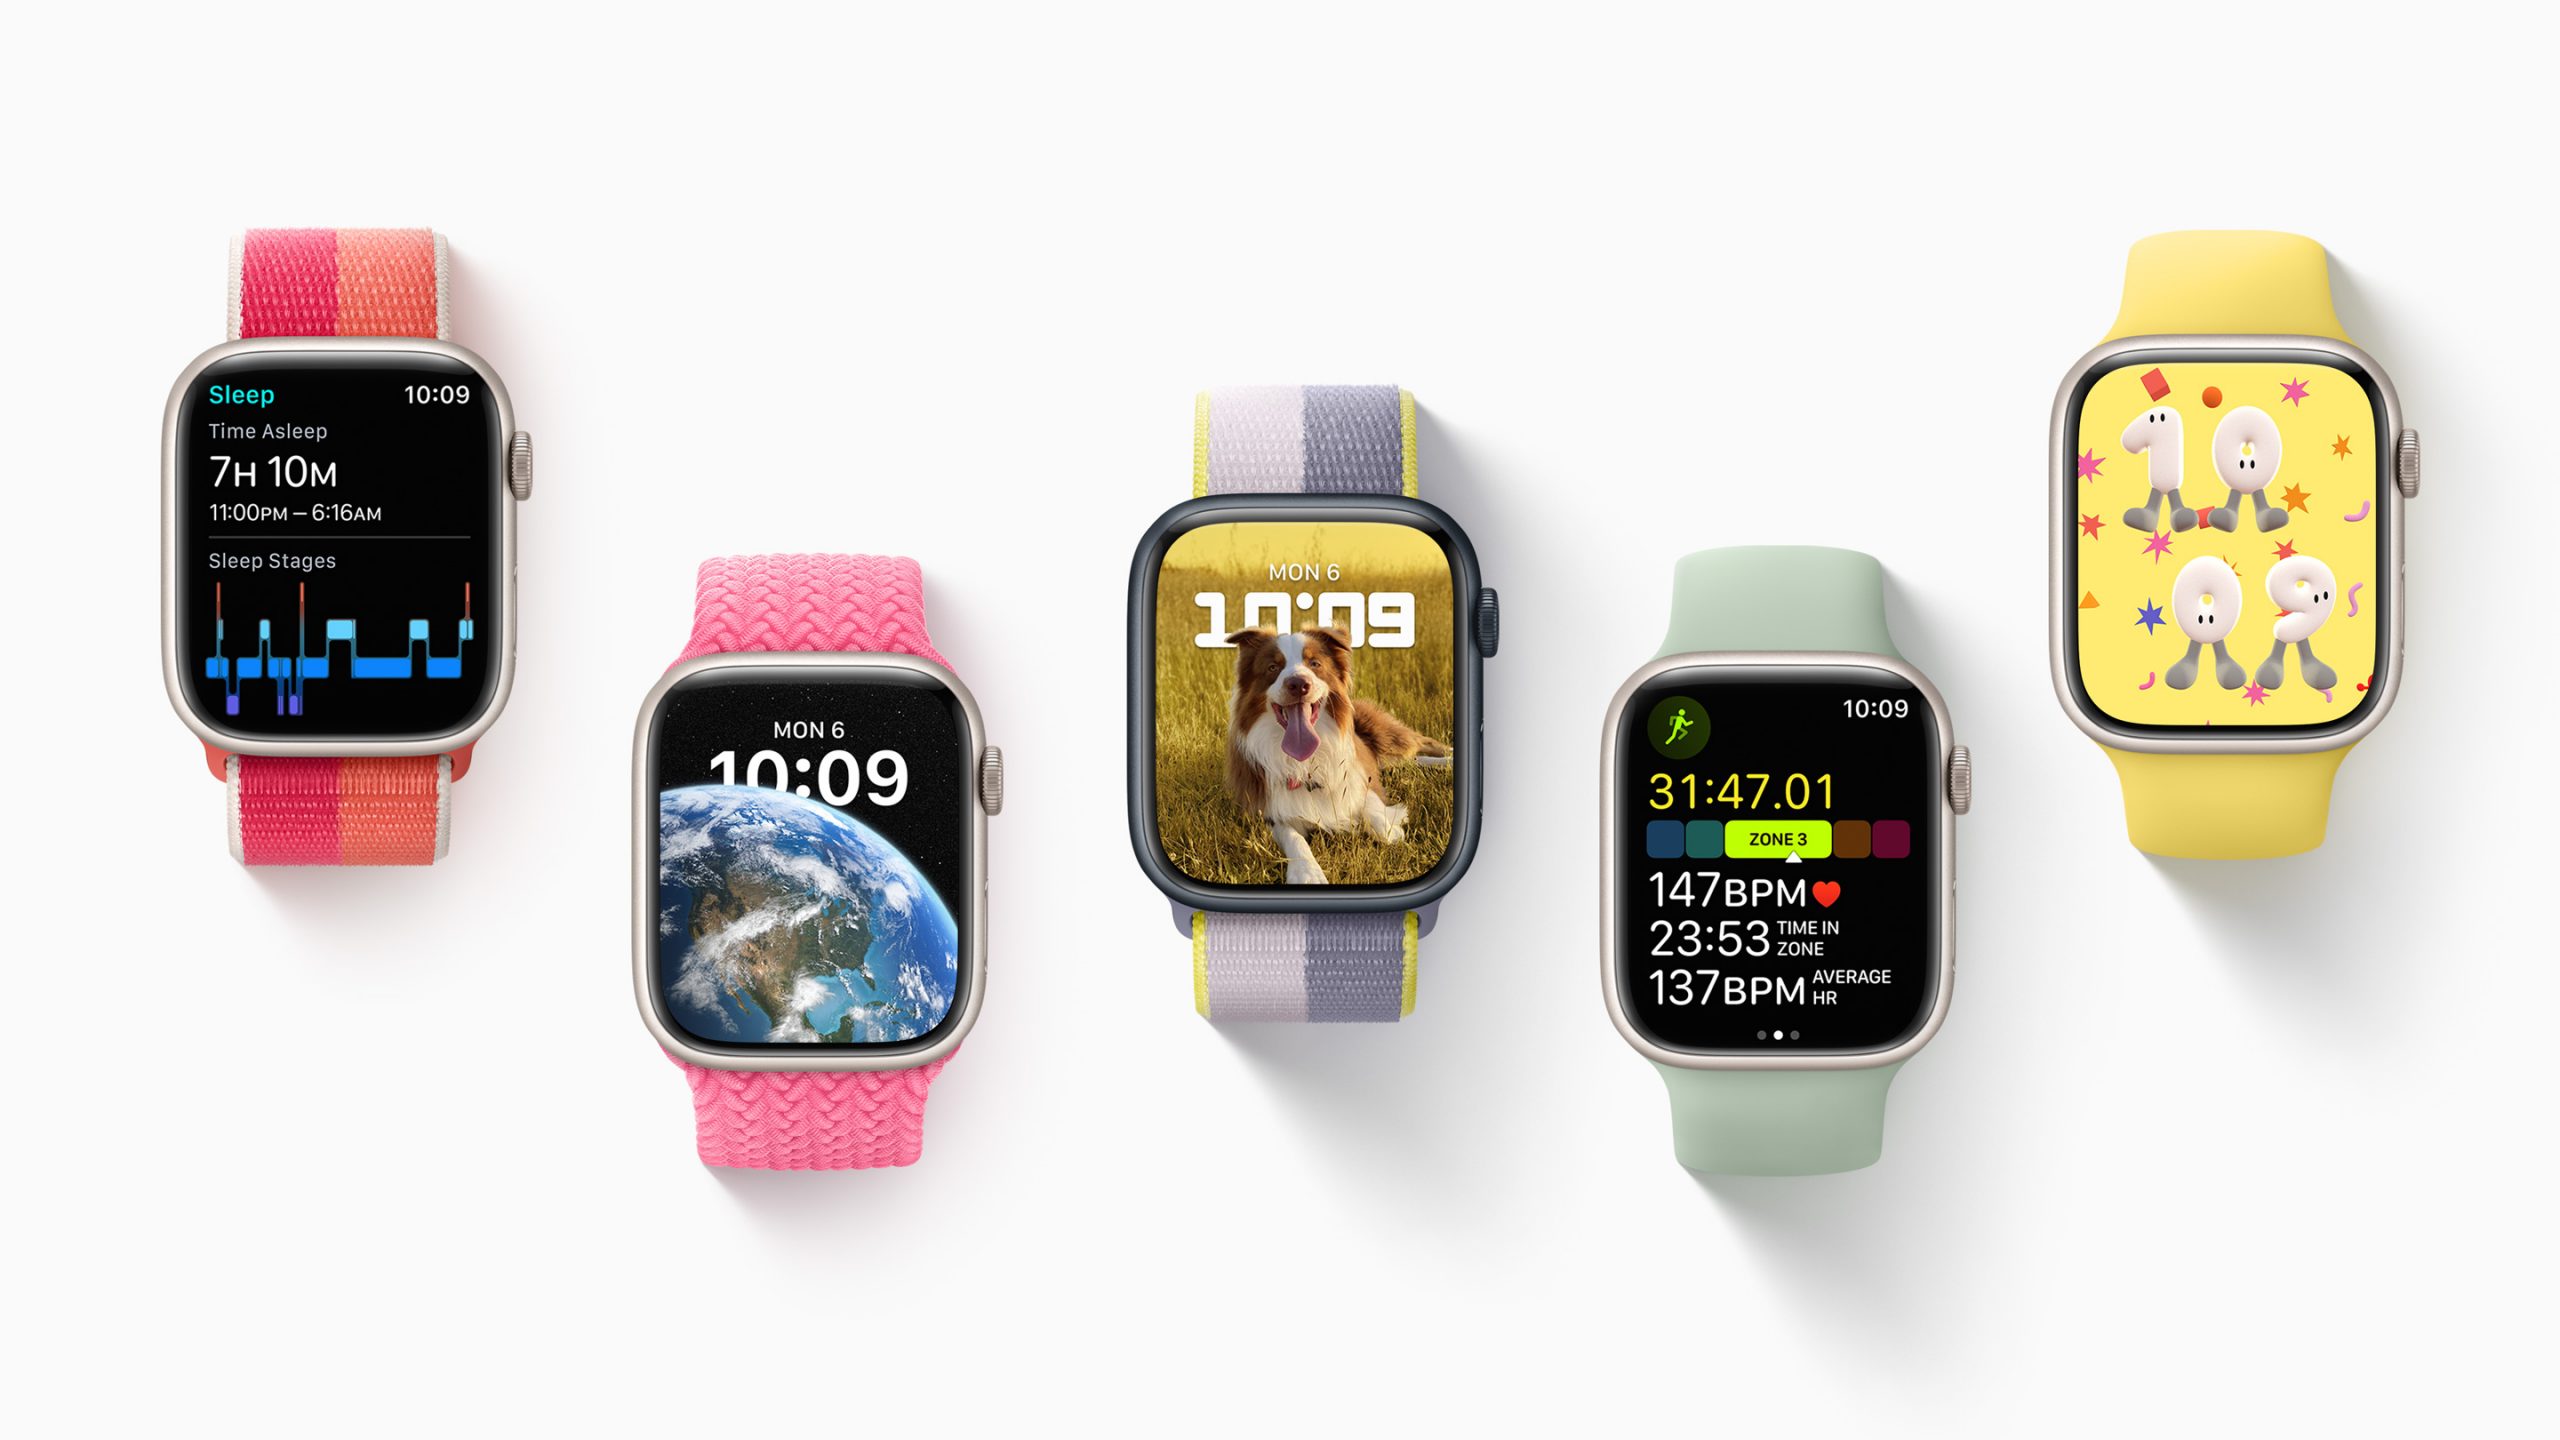 watchOS 9 brings new experiences and features, app updates, and creative ways to customize Apple Watch to fit any style.